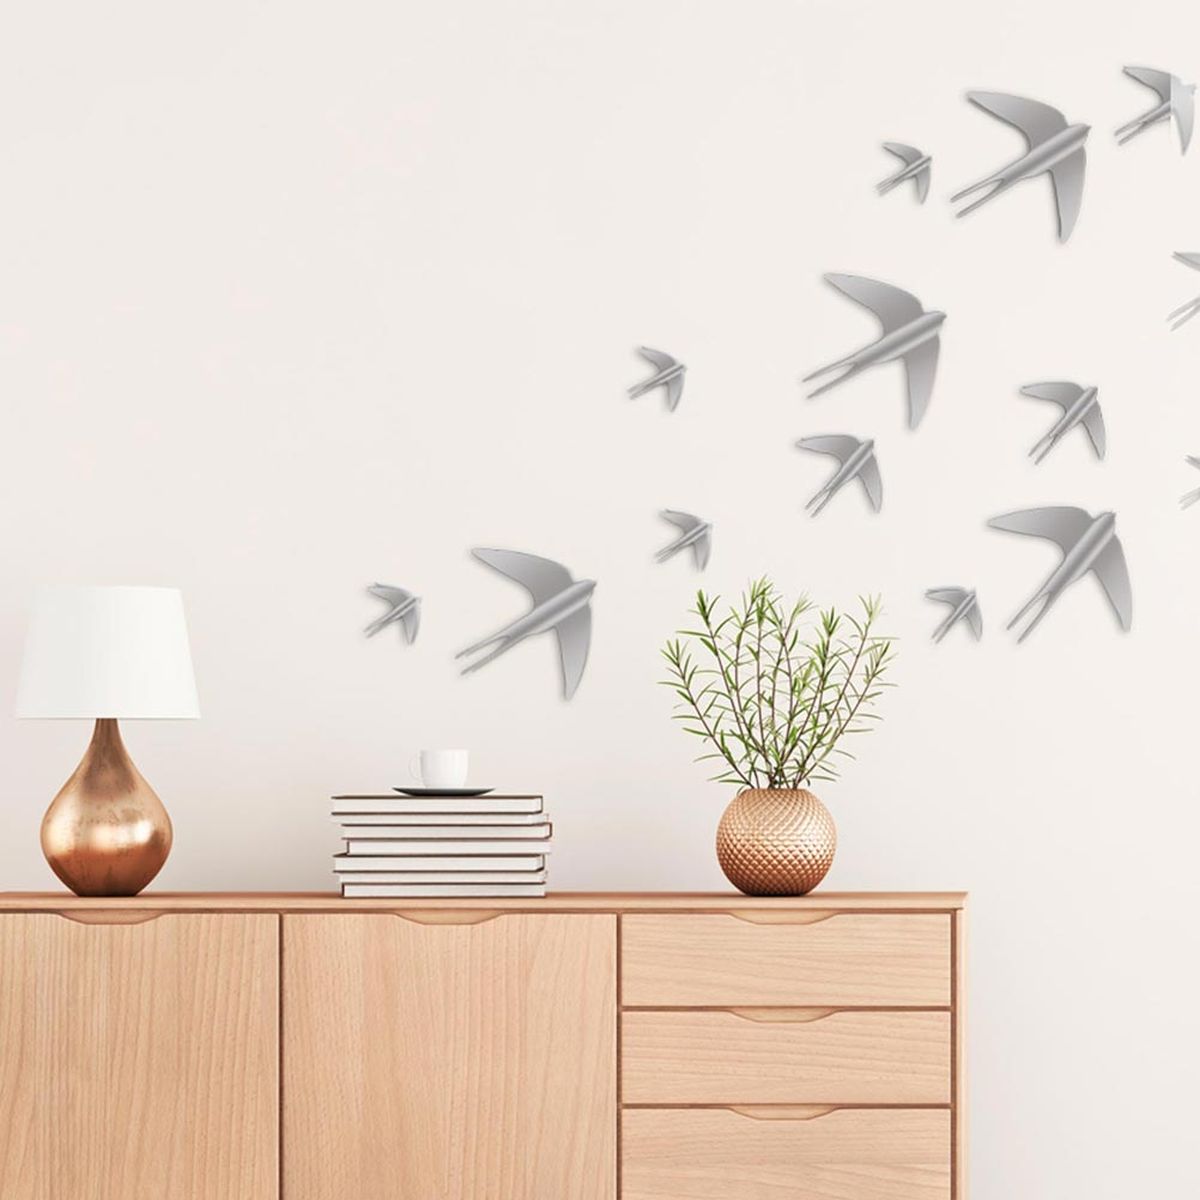 16 Decorative Stickers 3D Gray Swallows